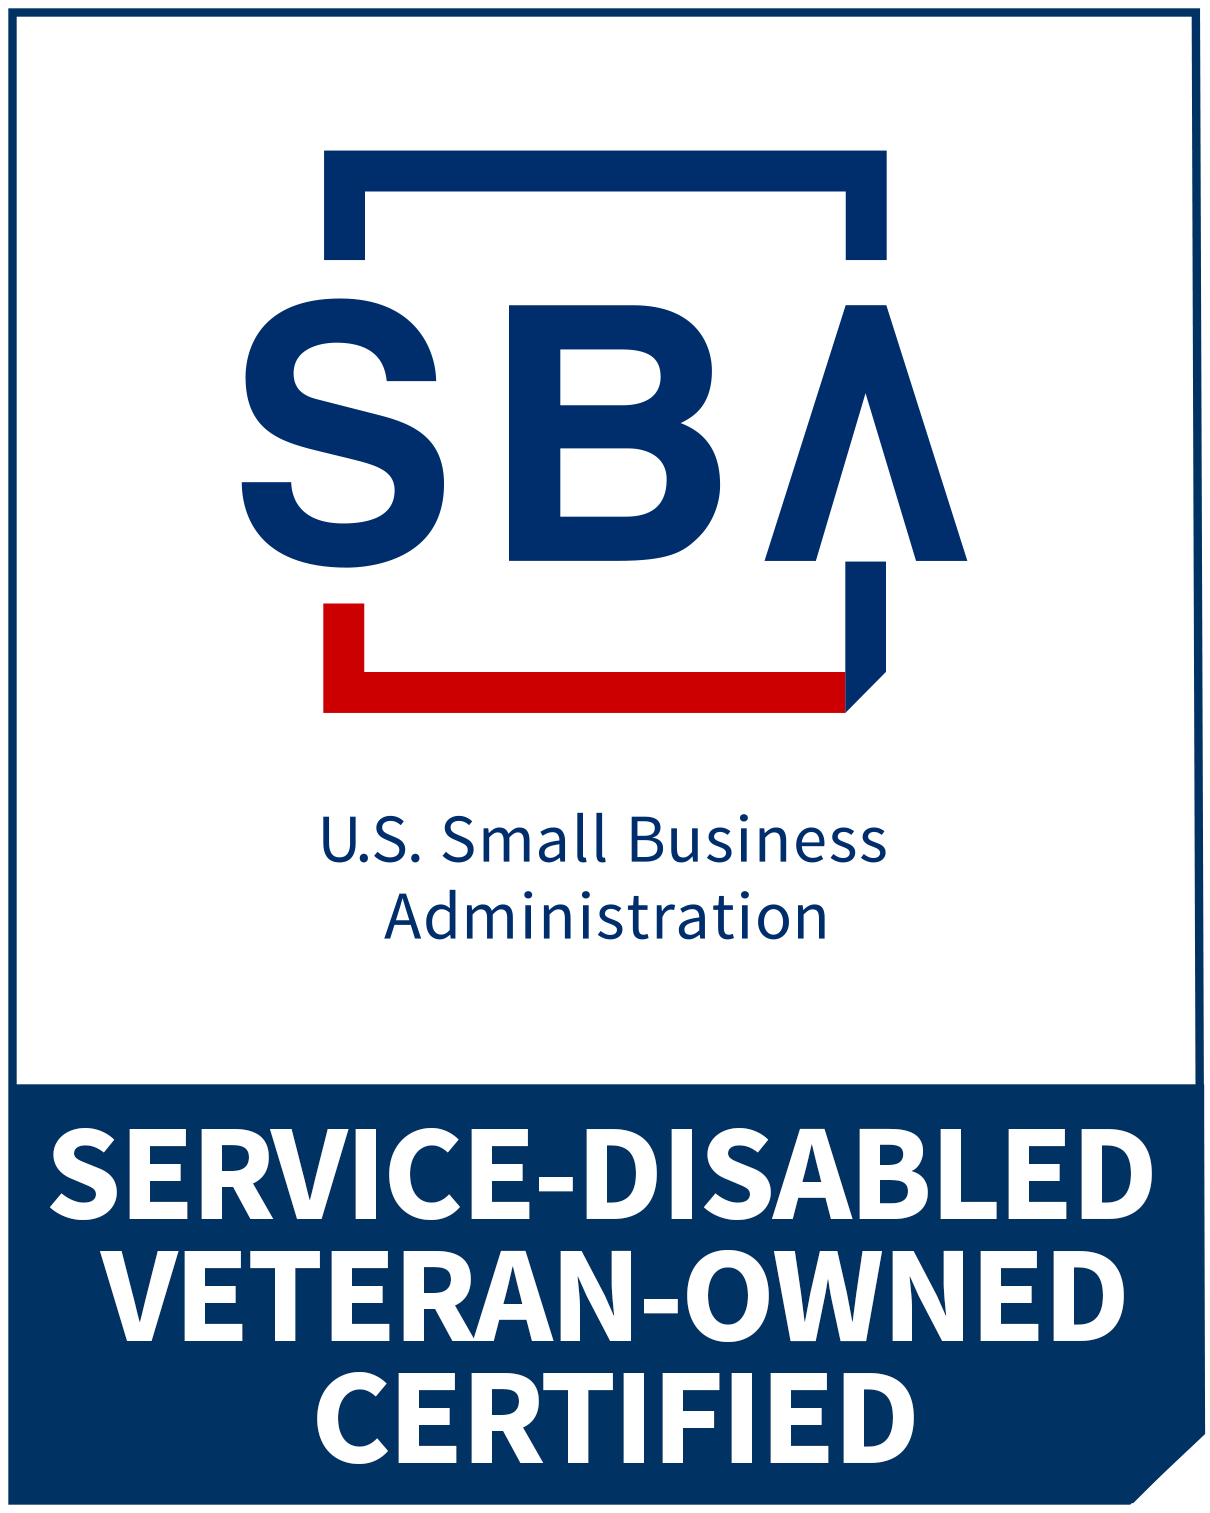 Marketing Excellence is a Certified Service Disabled Veteran Owned Small Business (SDVOSB)